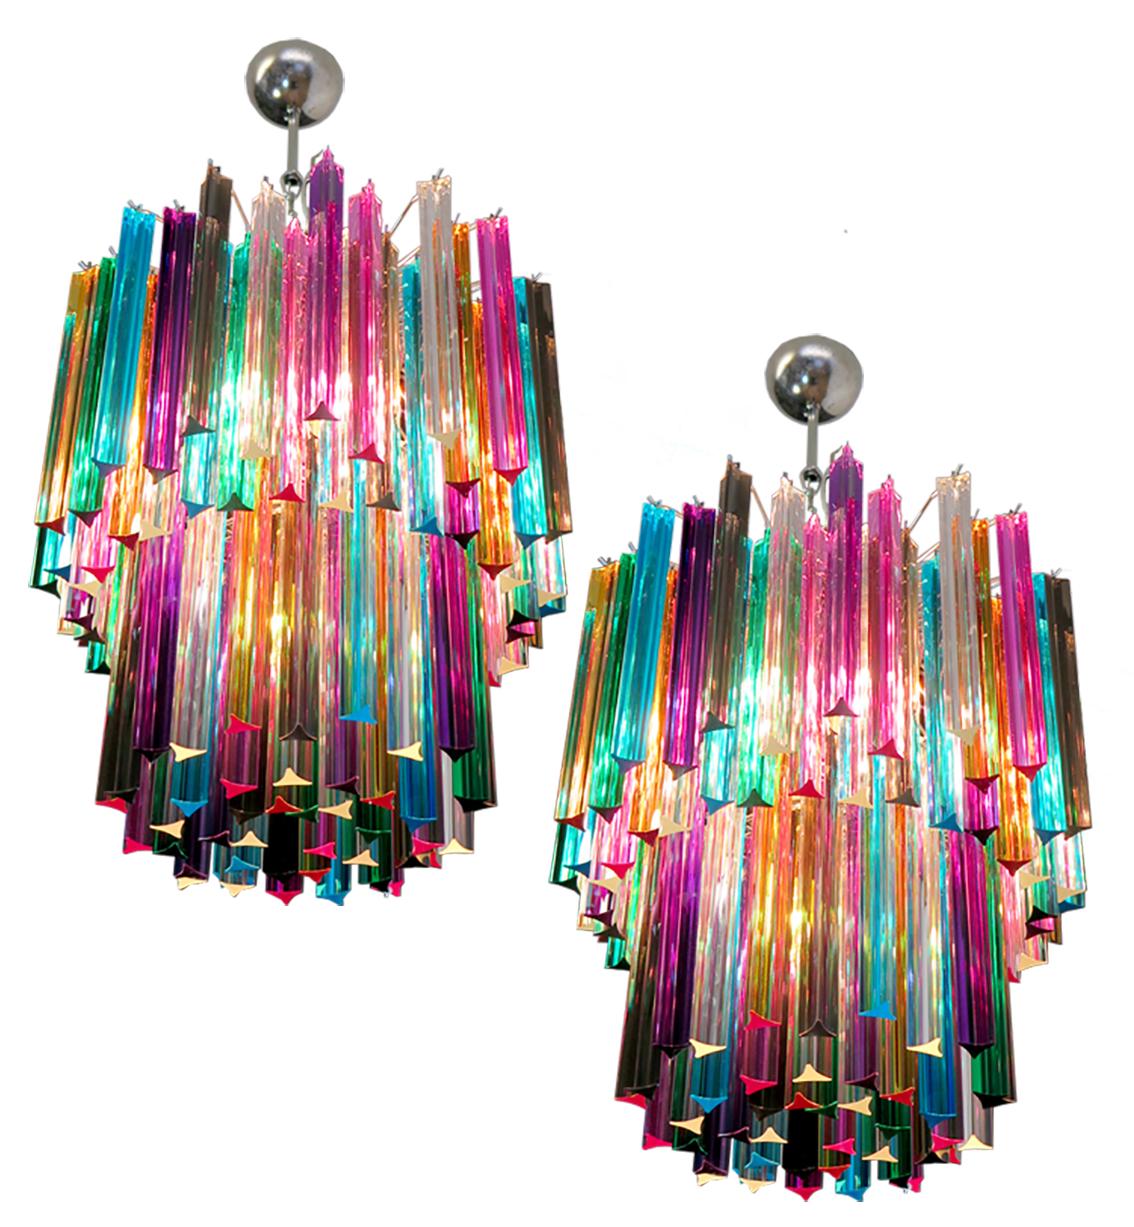 Fantastic Murano chandelier made by 107 Murano crystal multicolored prism in a nickel metal frame. The glasses are transparent, blue, smoky, purple, green, yellow and pink.
Dimensions: 55.10 inches height (140cm) with chain, 29.50 inches height